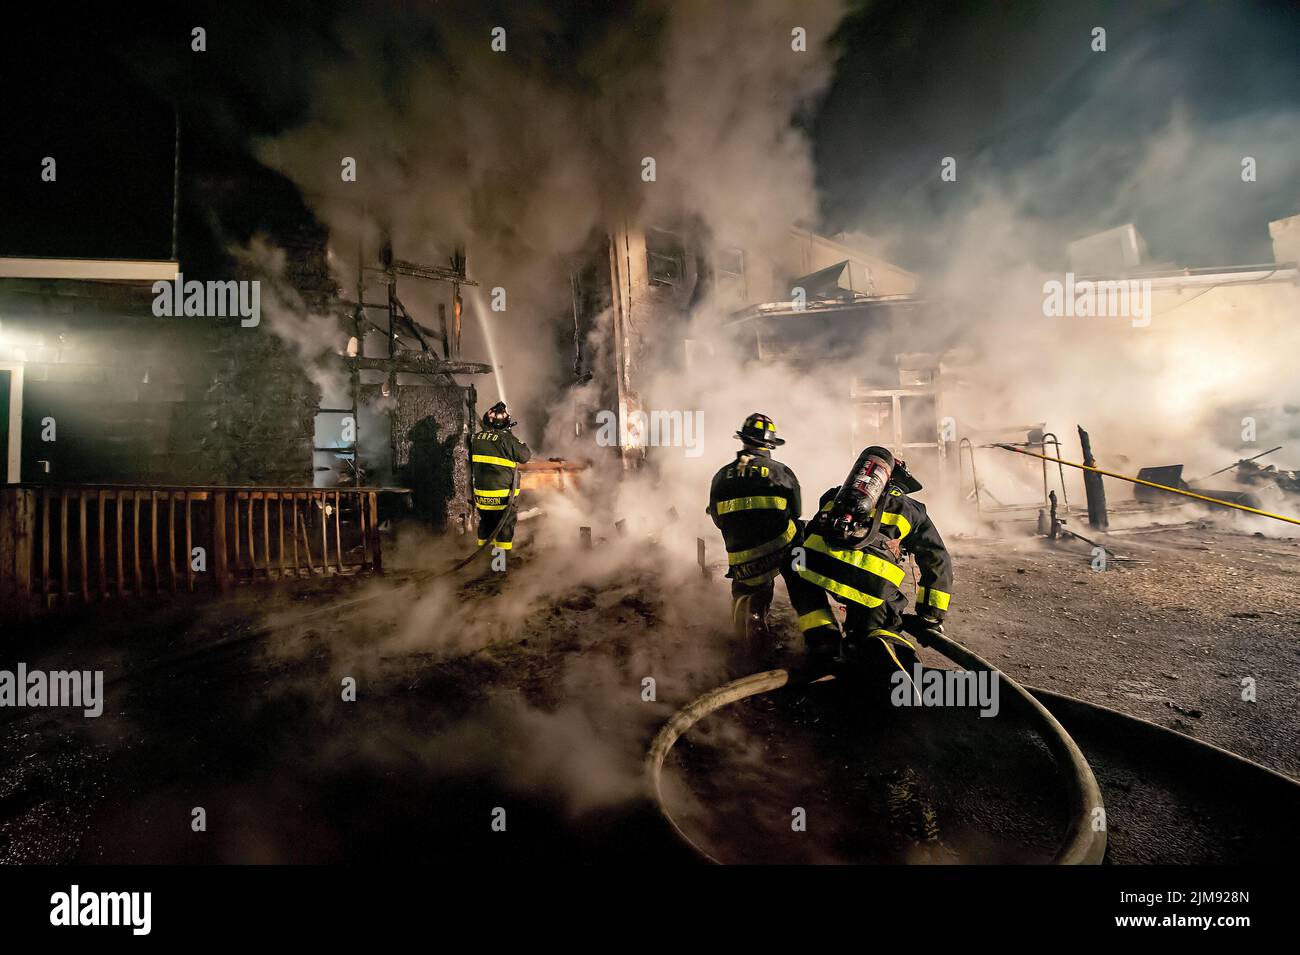 At 3:23 a.m. on April 24th, 2015, the East Hampton Fire Department was dispatched to a working structure fire in the rear of the JCrew store at 14 Mai Stock Photo